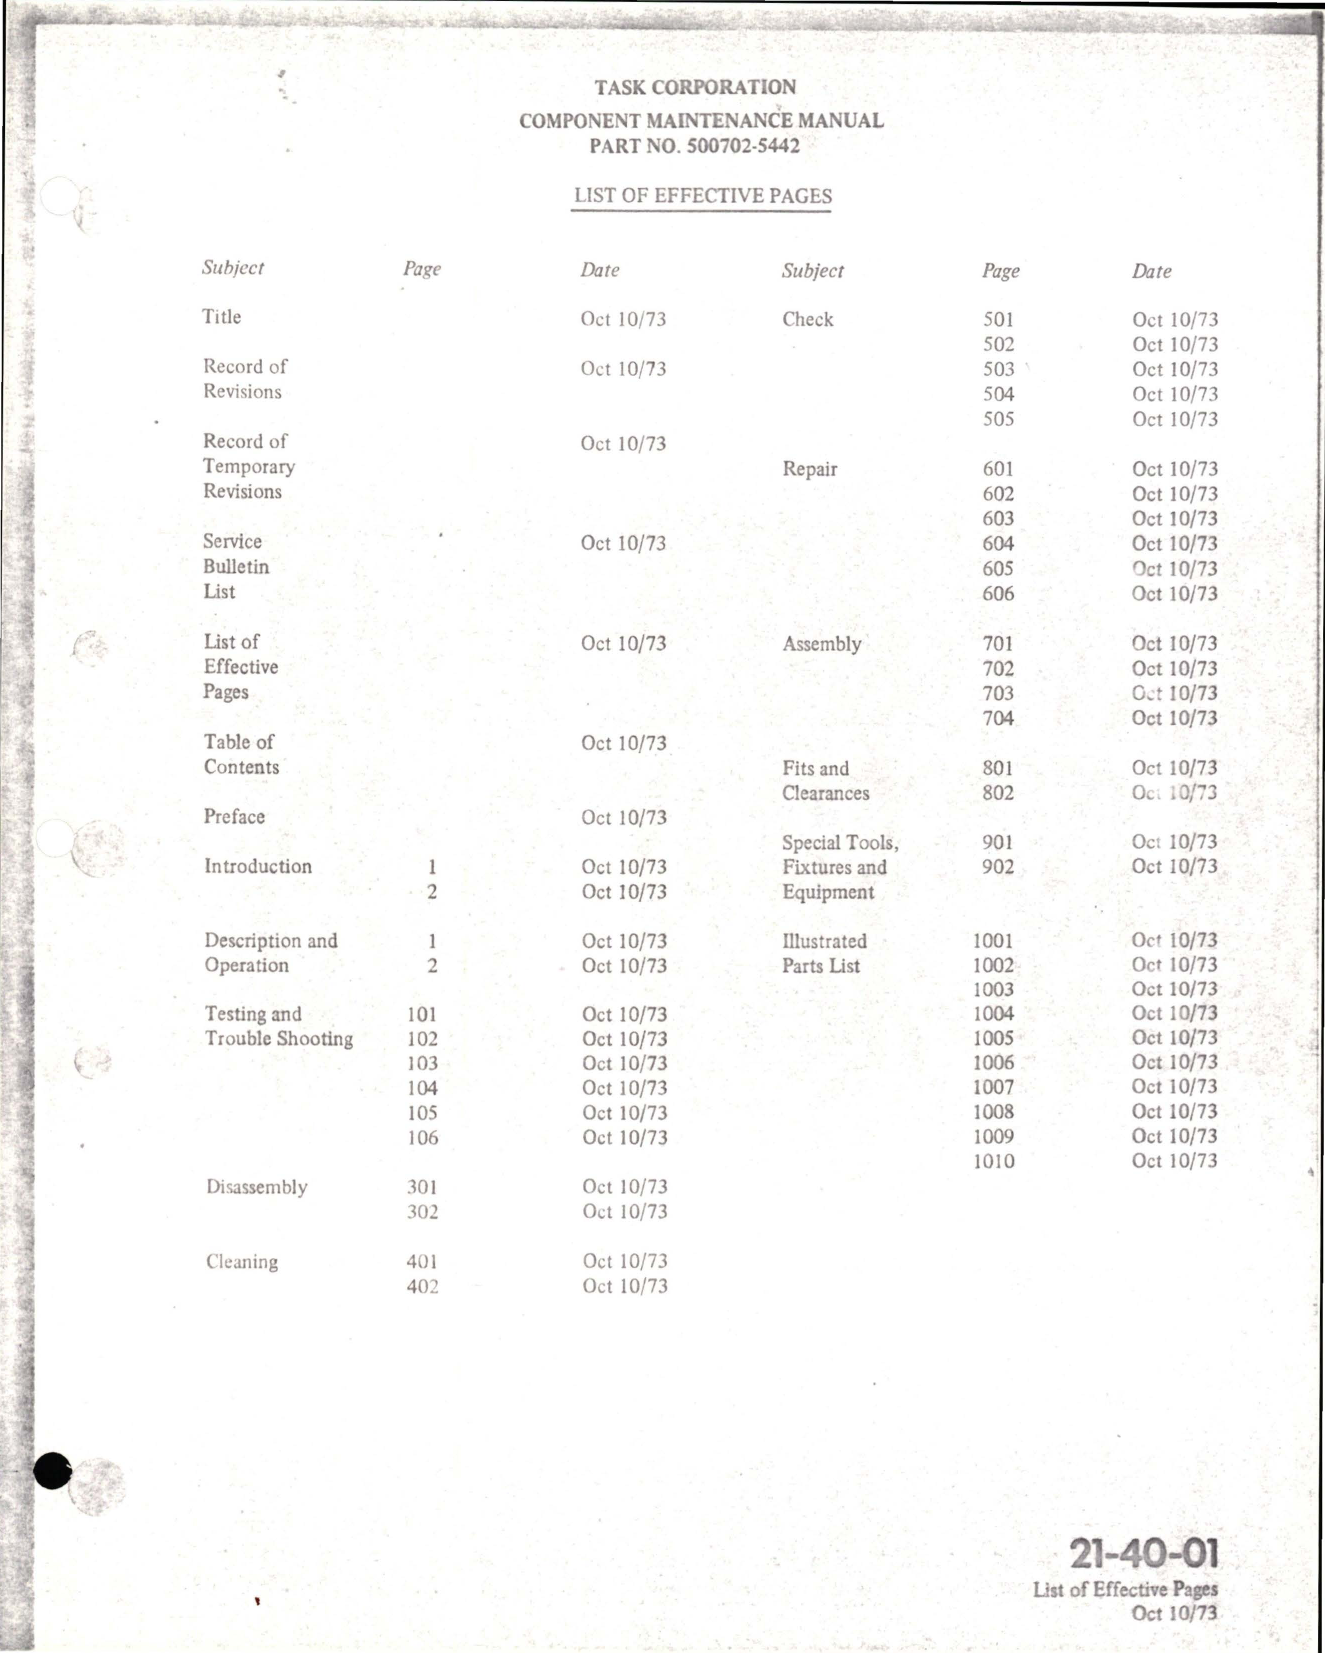 Sample page 5 from AirCorps Library document: Maintenance Manual with Illustrated Parts List for Axivane Fan - Part 500702-5442 